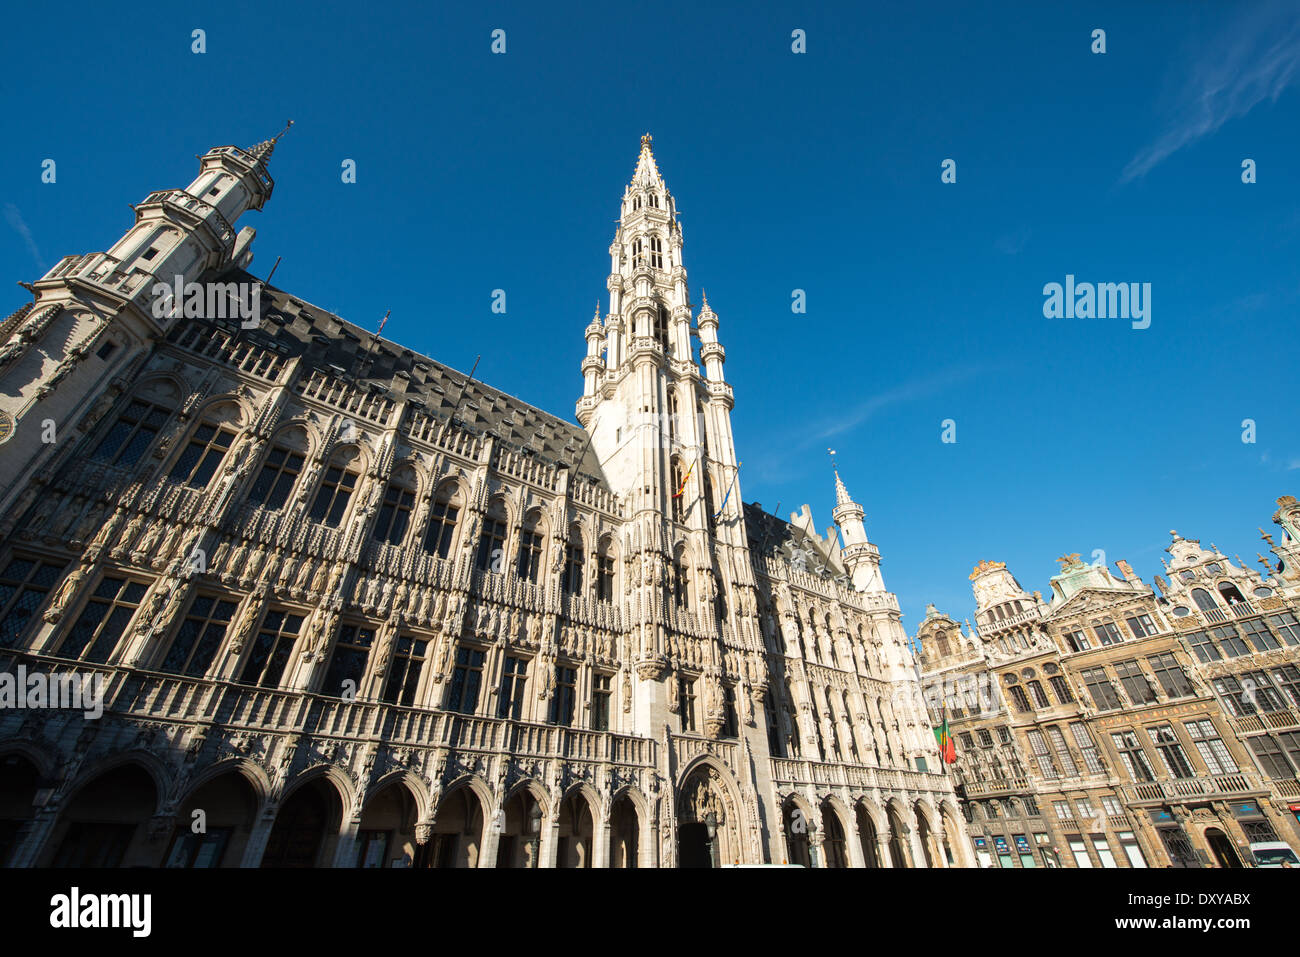 BRUSSELS, Belgium — on Grand Place (La Grand-Place), a UNESCO World Heritage Site in central Brussels, Belgium. Lined with ornate, historic buildings, the cobblestone square is the primary tourist attraction in Brussels. Stock Photo